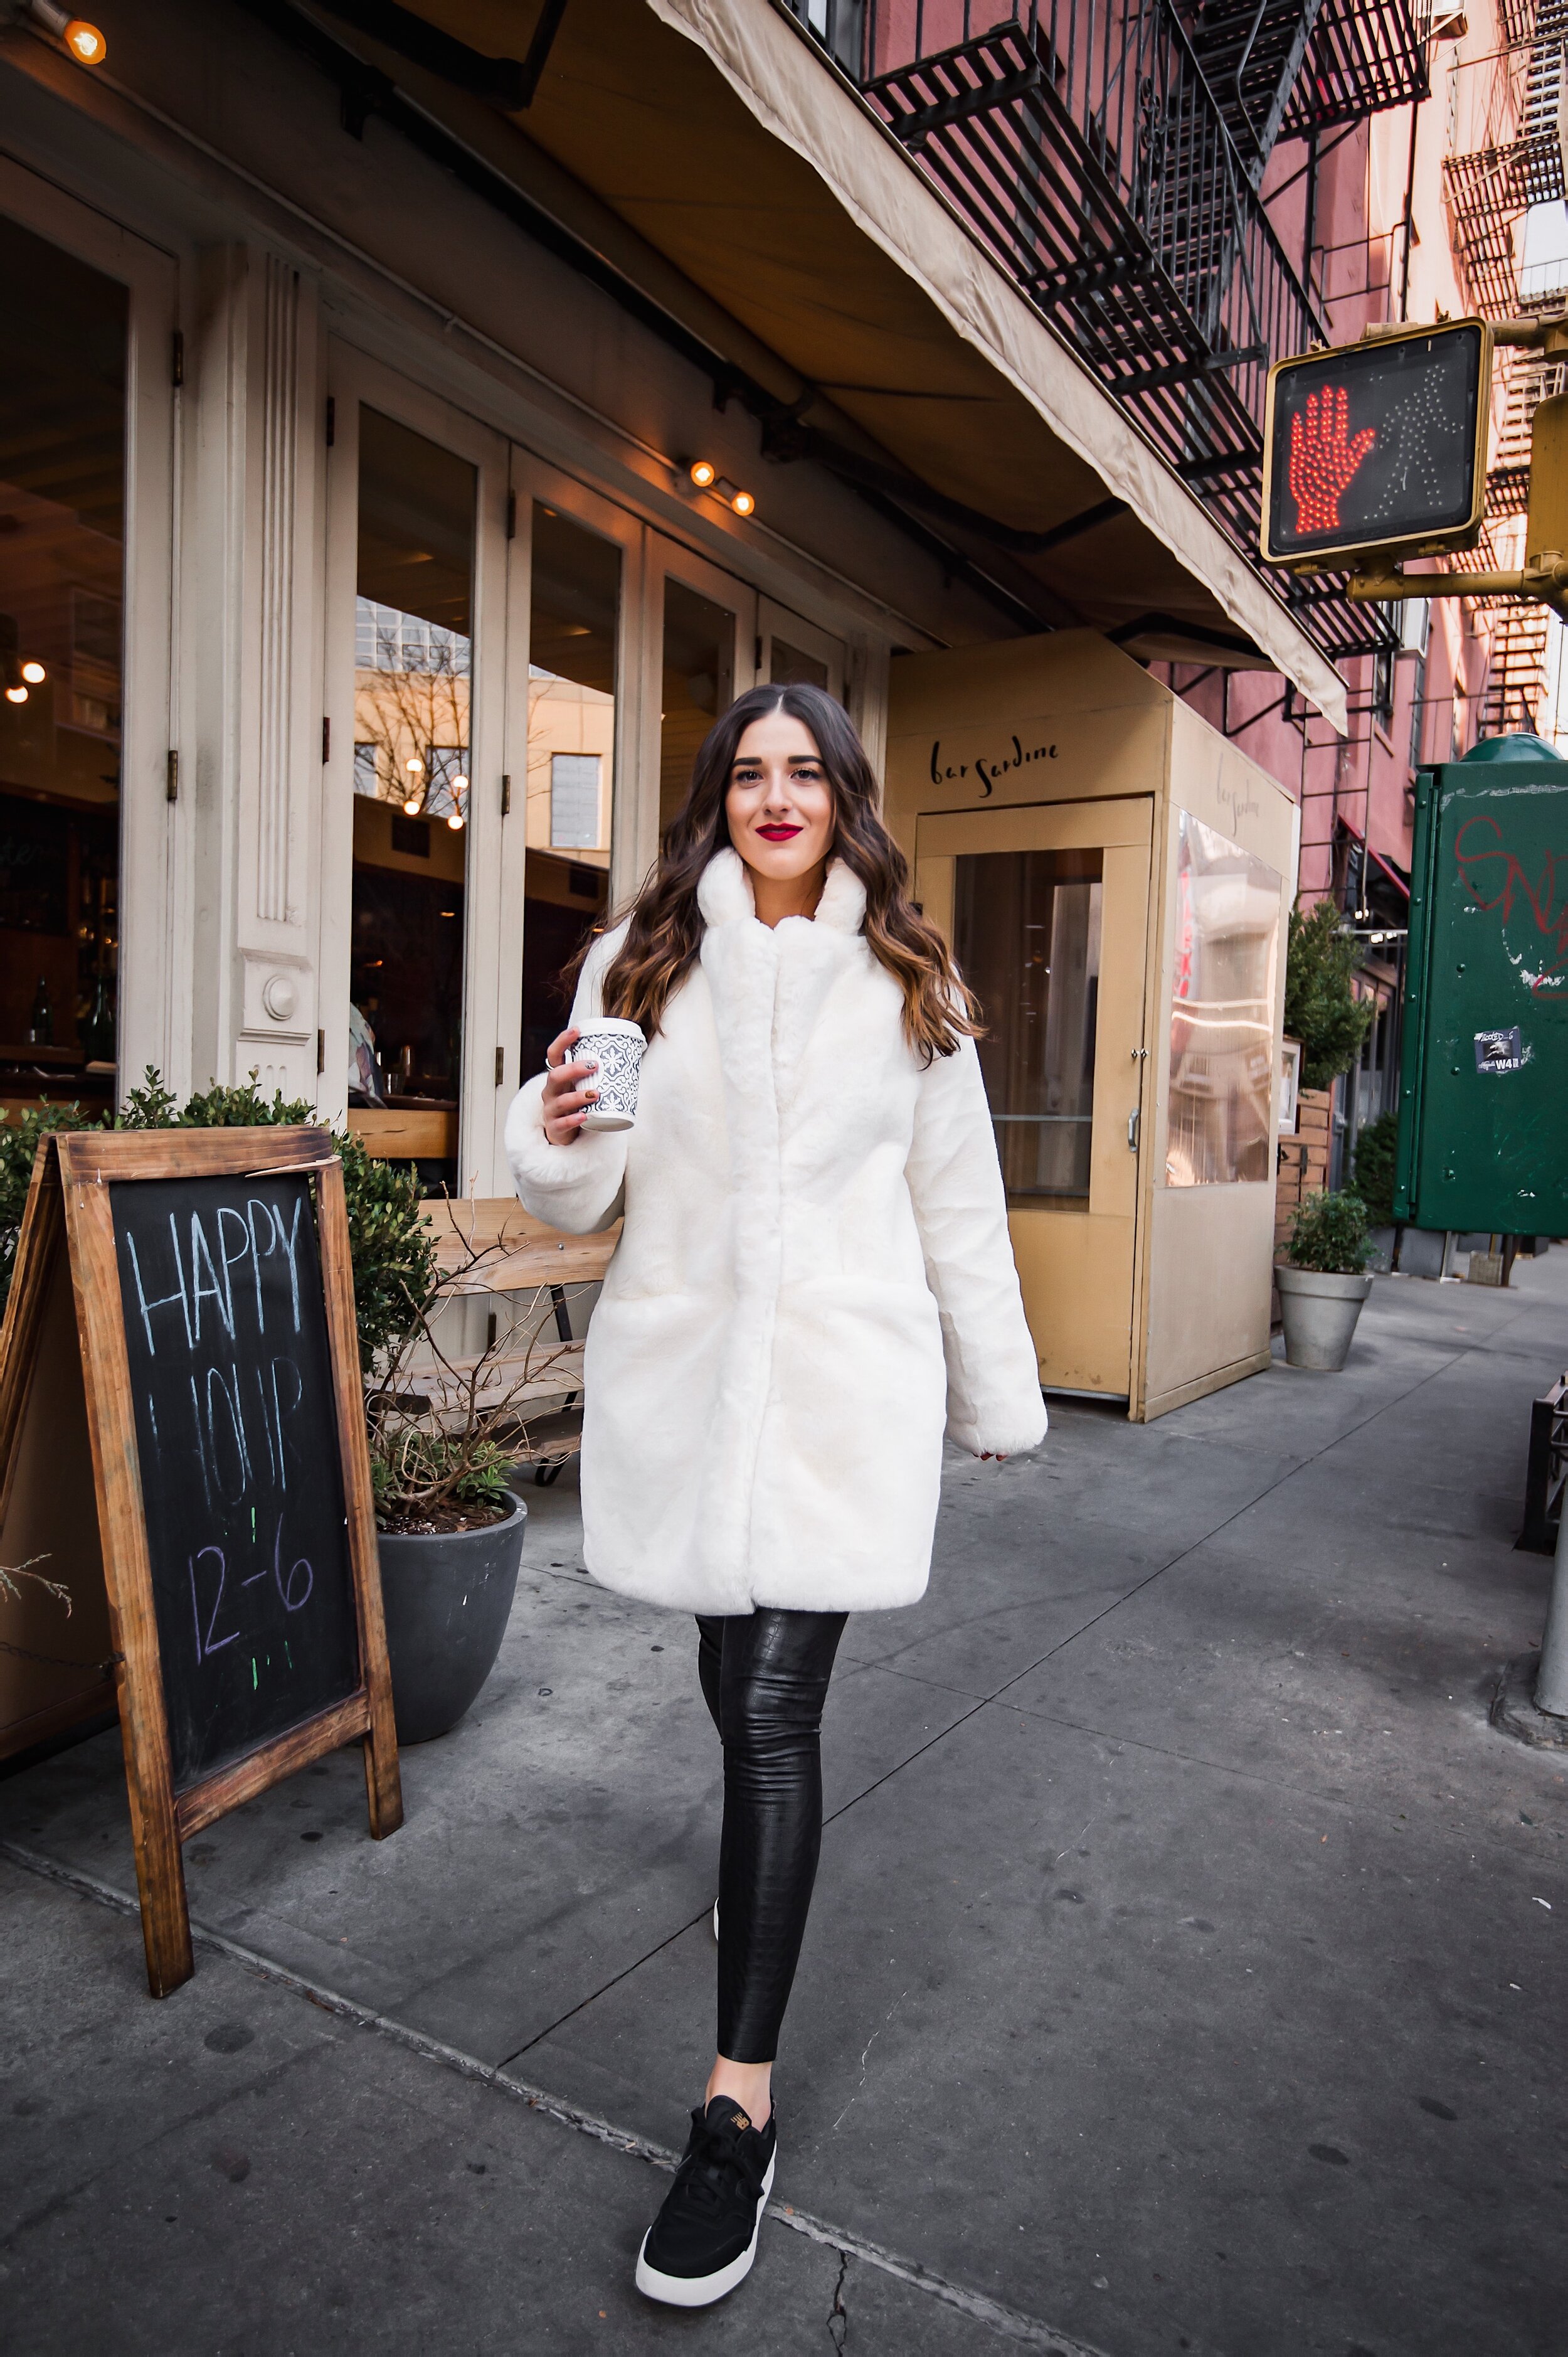 White Fur Coat Black Snakeskin Leggings Esther Santer NYC Street Style Fashion Blog Winter Outfit OOTD Faux Fur Commando Nordstrom Maman Coffee Happy Girl Women Shopping Buy Red Lipstick Taxi Photography Manhattan Comfortable West Village  Location.JPG